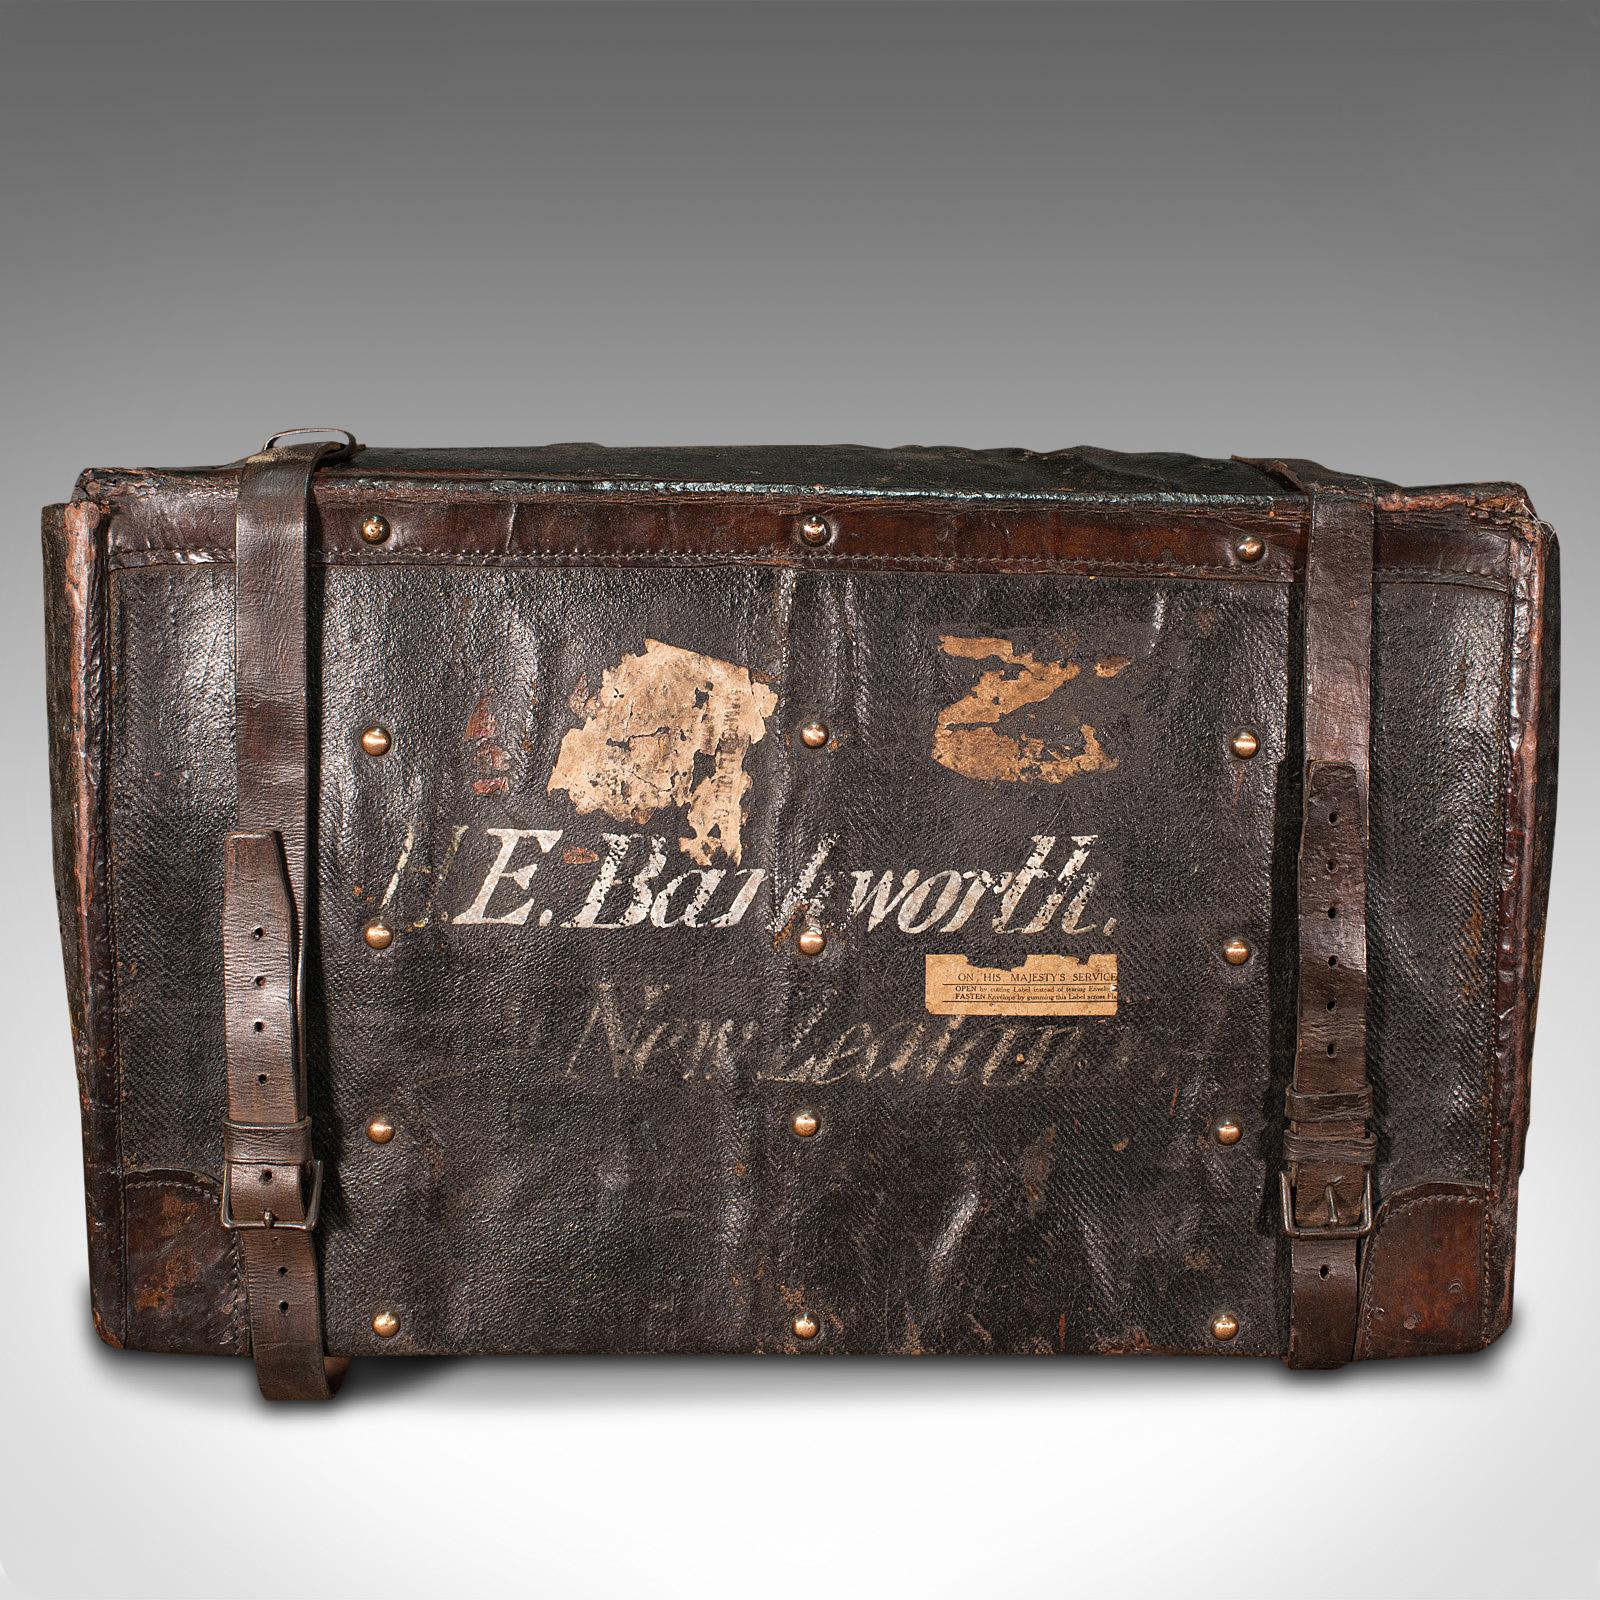 British Vintage Overseas Voyage Trunk, English, Leather, Travel Case, Luggage, C.1930 For Sale